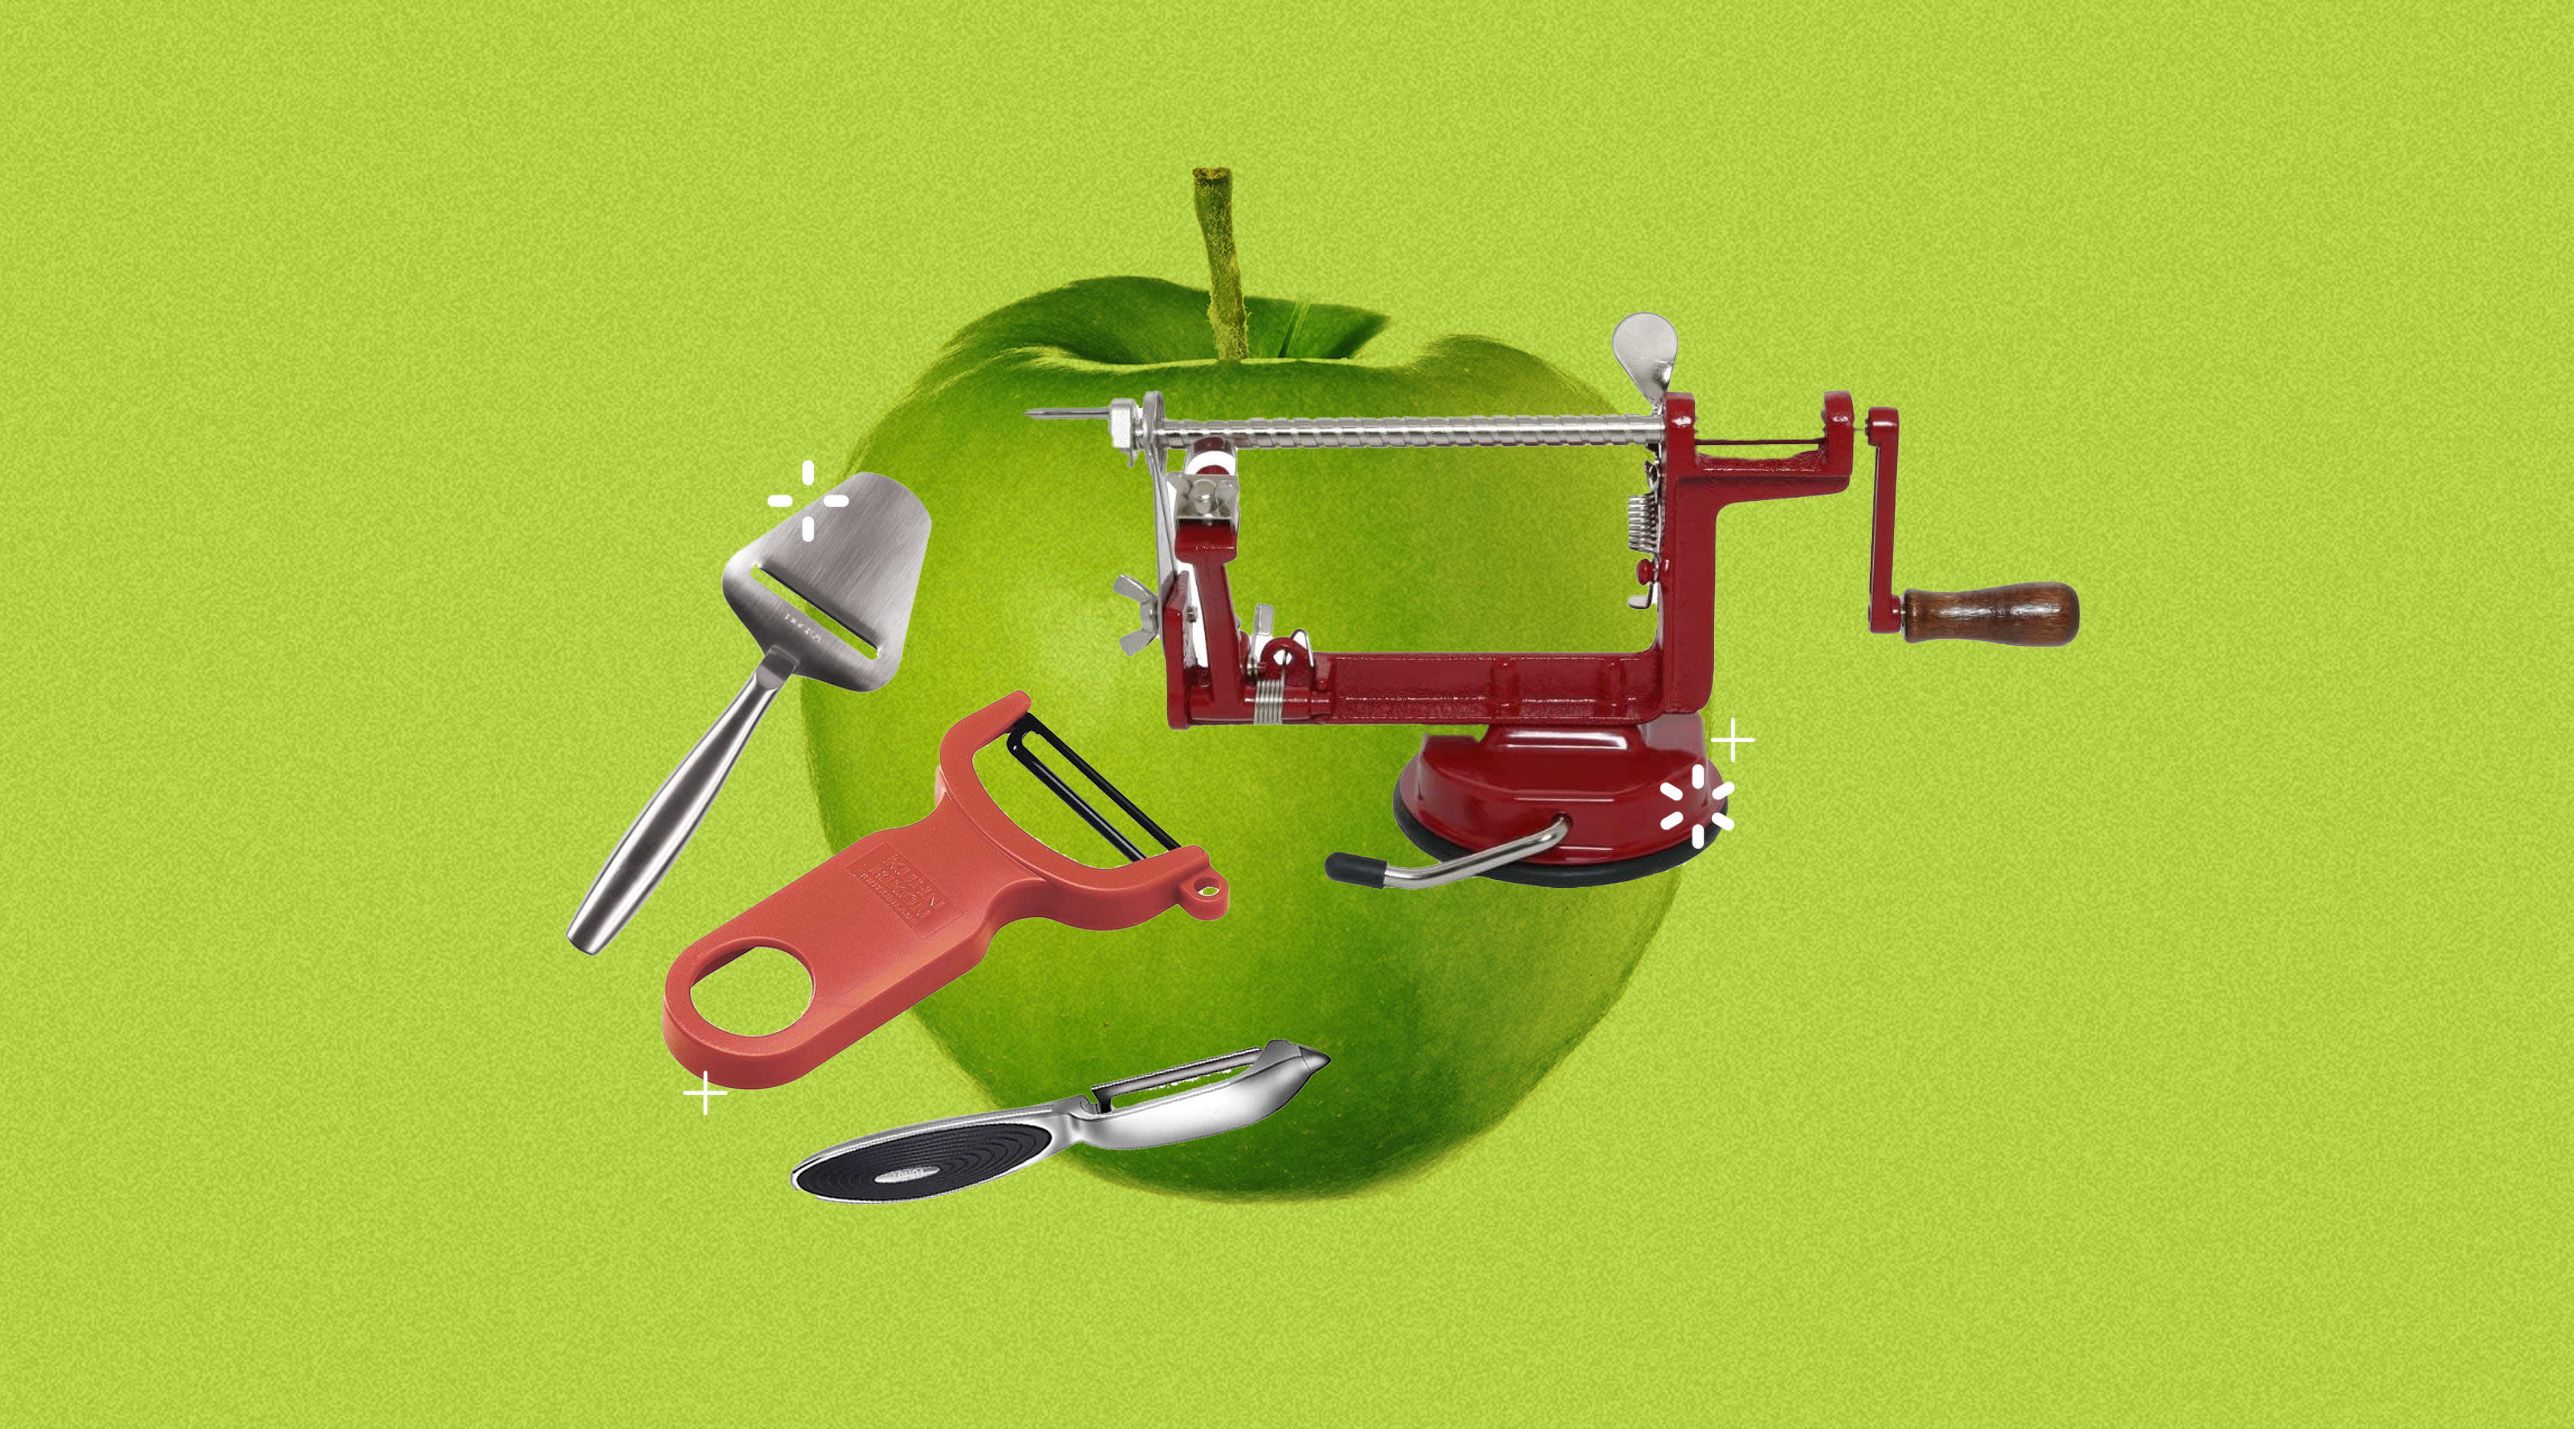 Fuhuy FUHUY Vegetable, Apple Peelers for kitchen, Fruit, Carrot